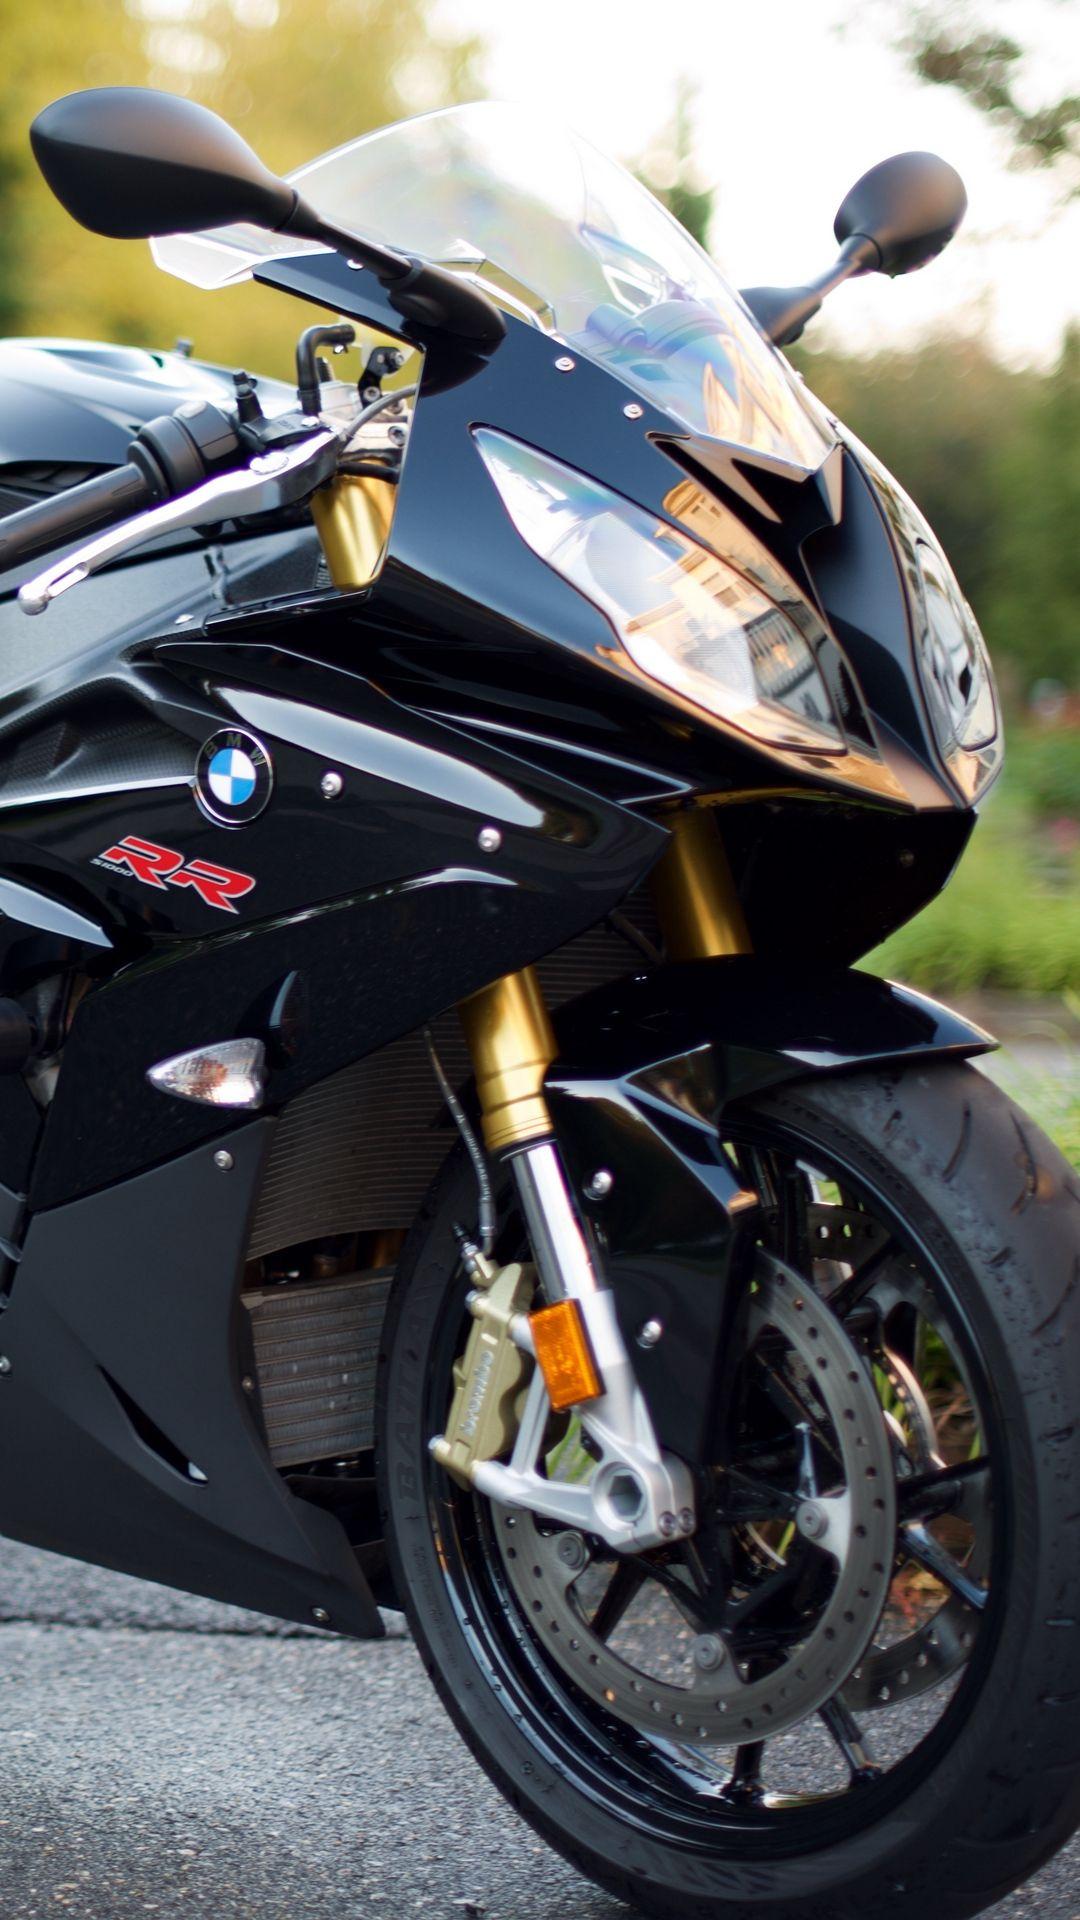 bmw s1000rr #bmw #bike #motorcycles #wallpaper #lockscreen #mobile #android #ios #infinitywallpaper. Bmw s1000rr, Motorcycle, Bmw